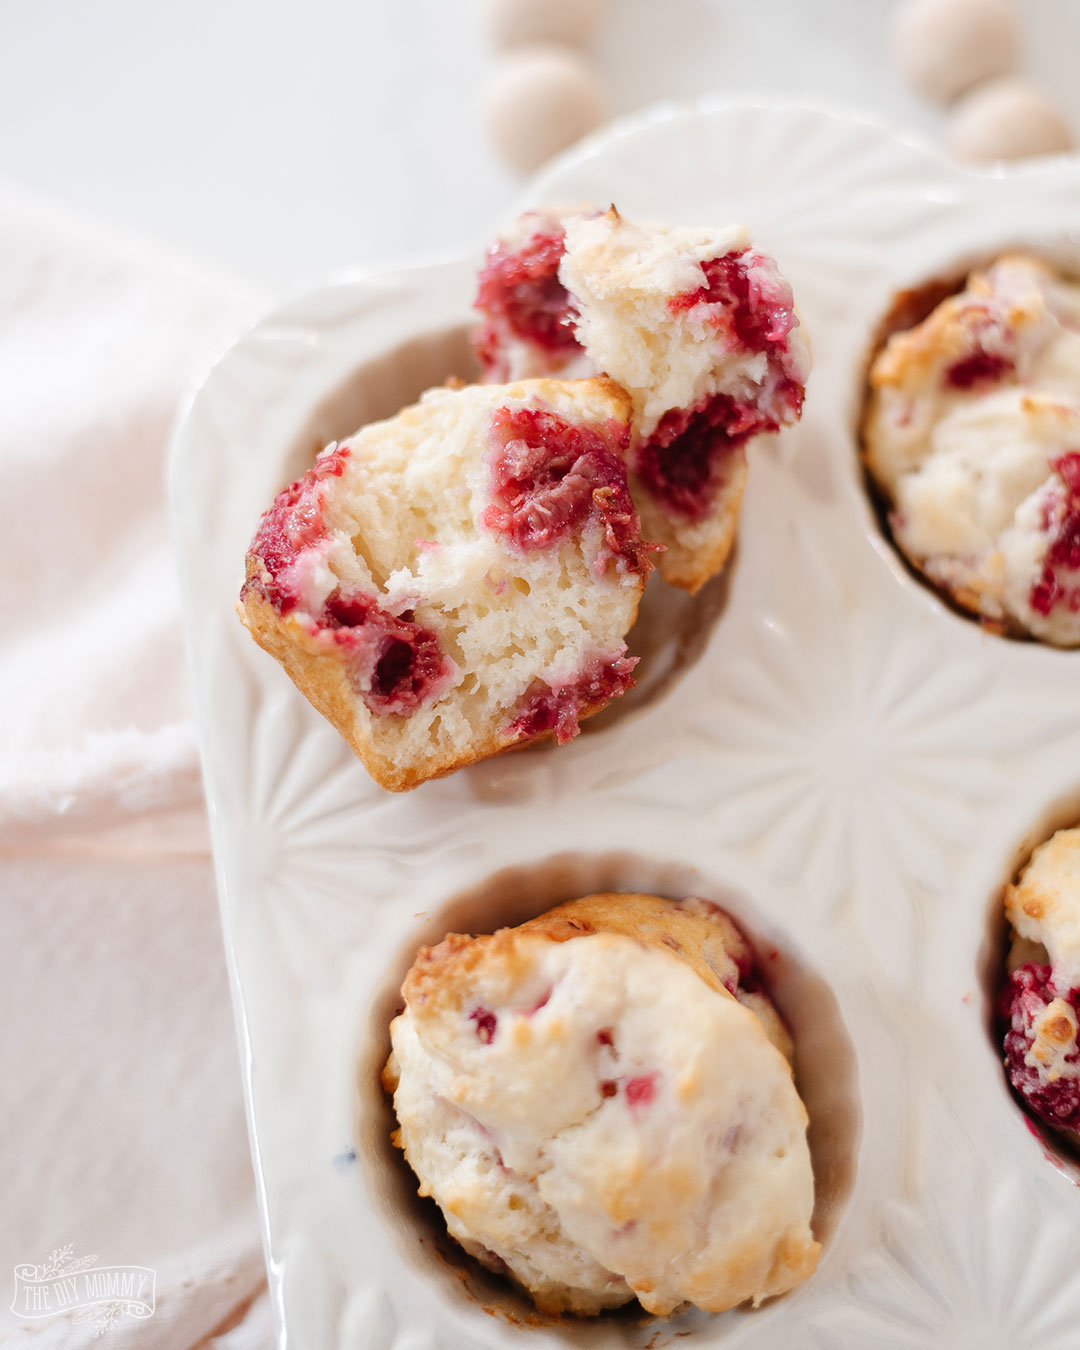 This raspberry muffin recipe is extra moist and flavourful with the addition of Greek yogurt. So simple to make!